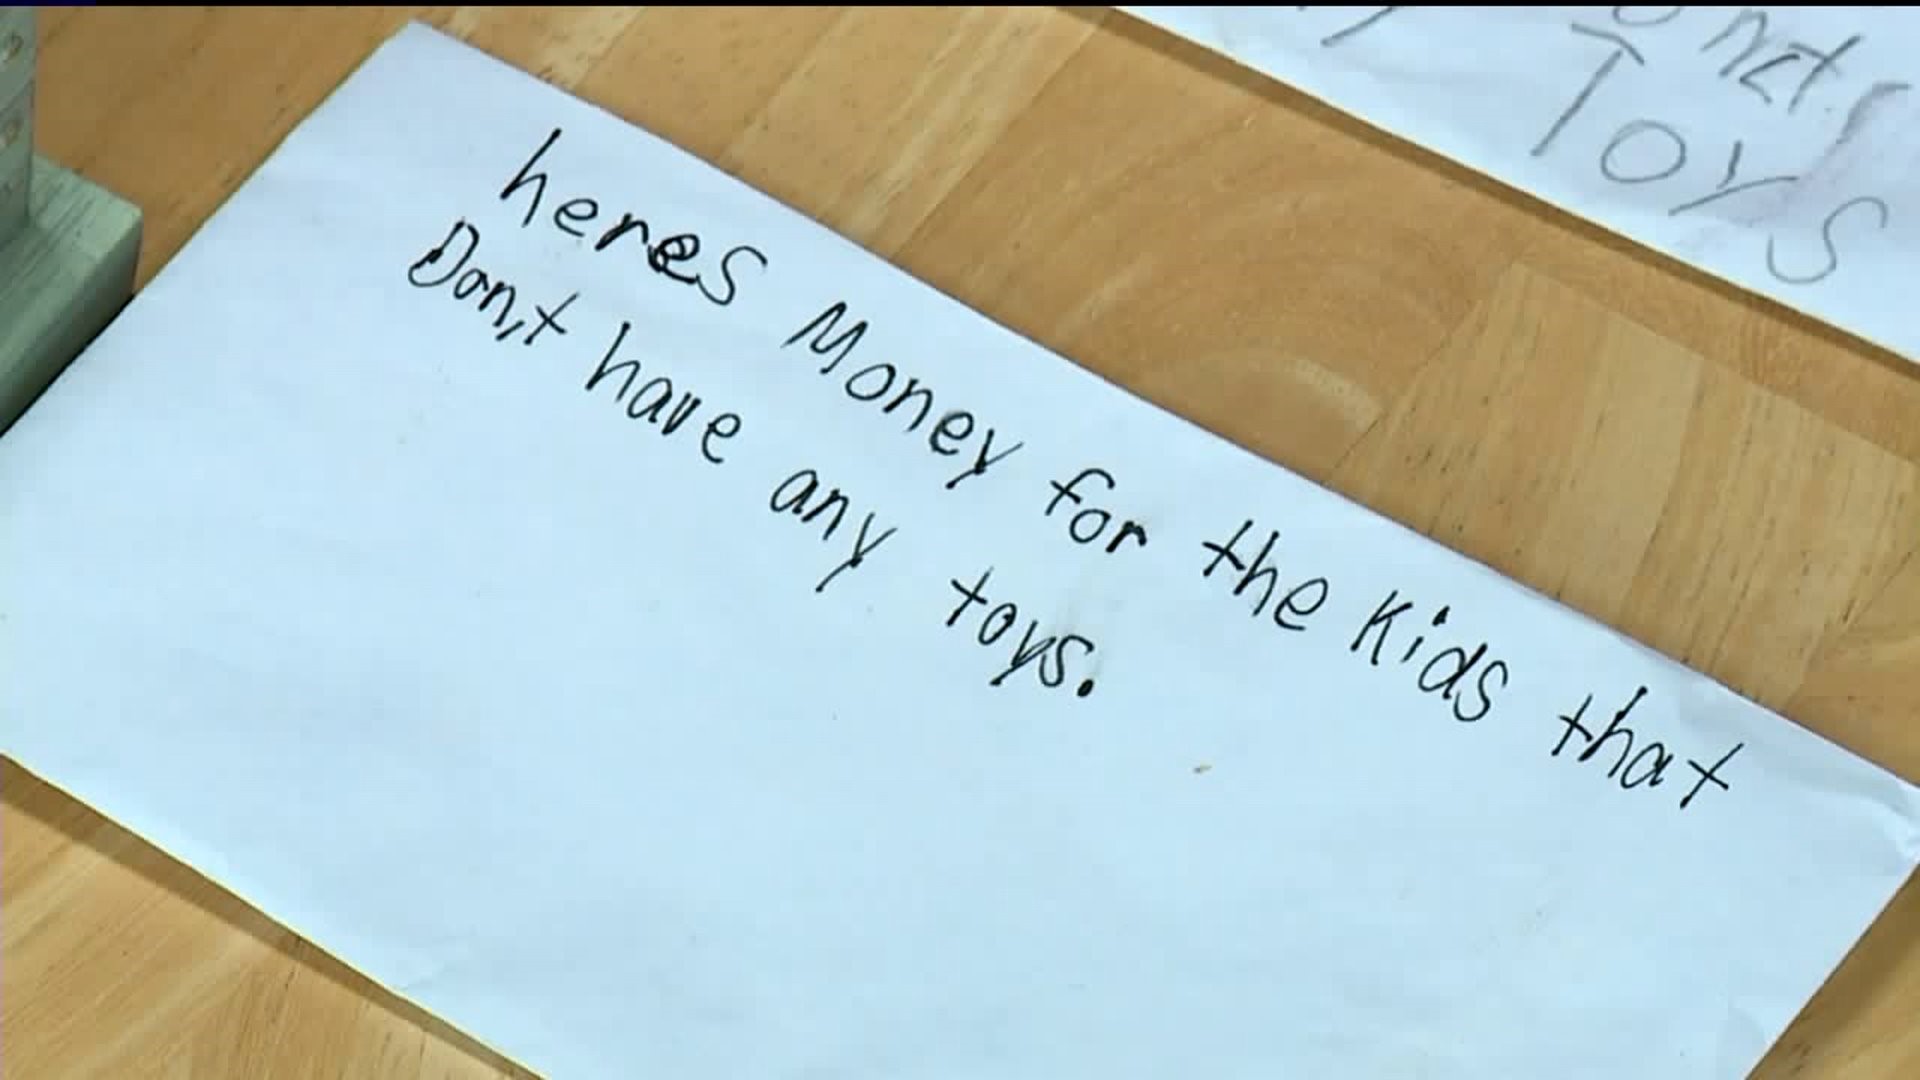 Children Give Money to Santa to Buy Toys for Those in Need